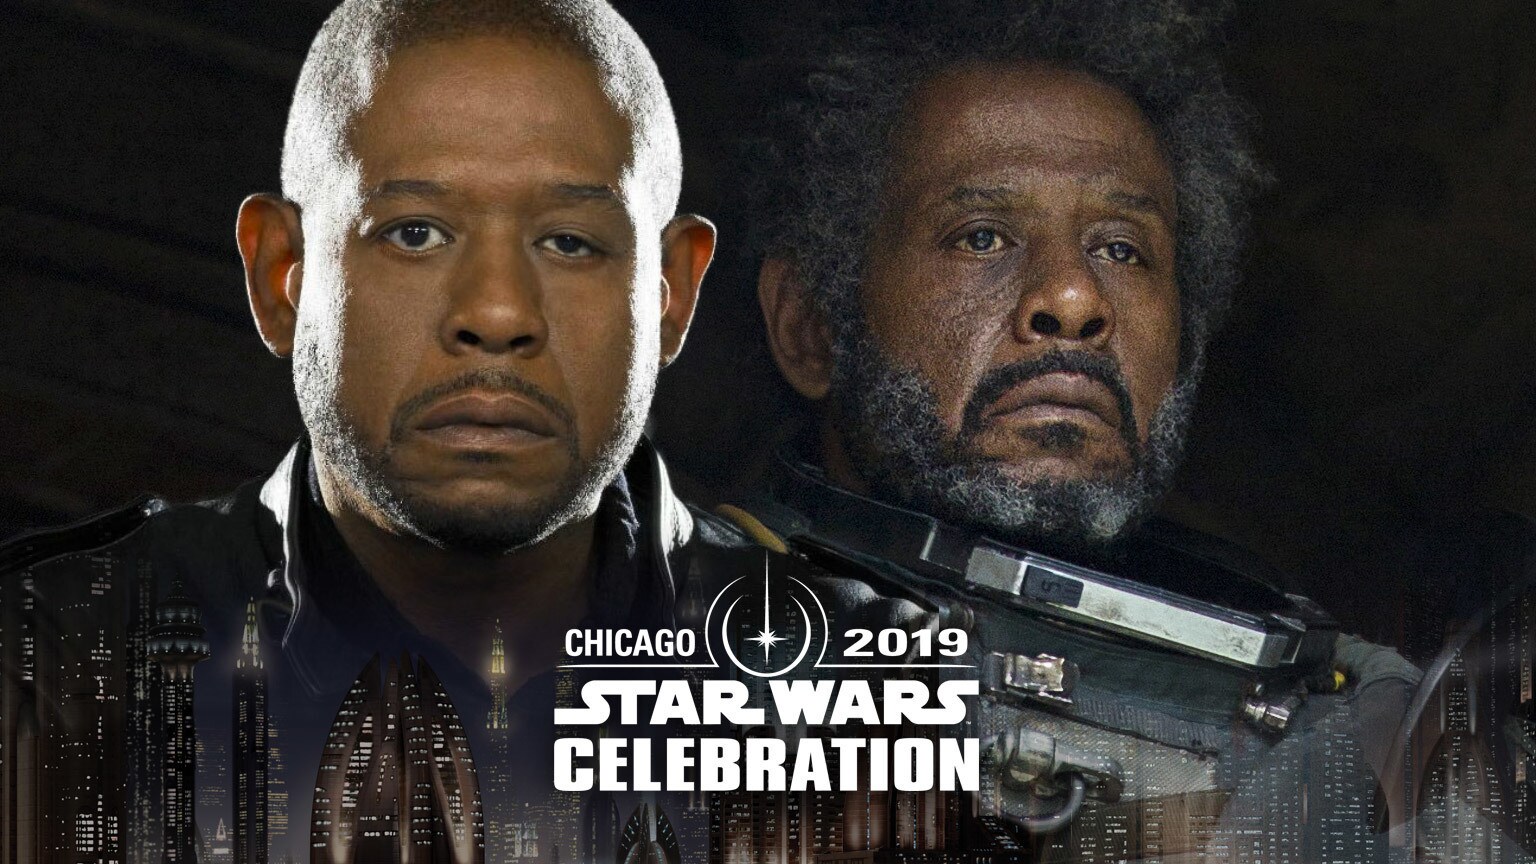 Rogue One's Forest Whitaker to Join Fans at Star Wars Celebration Chicago